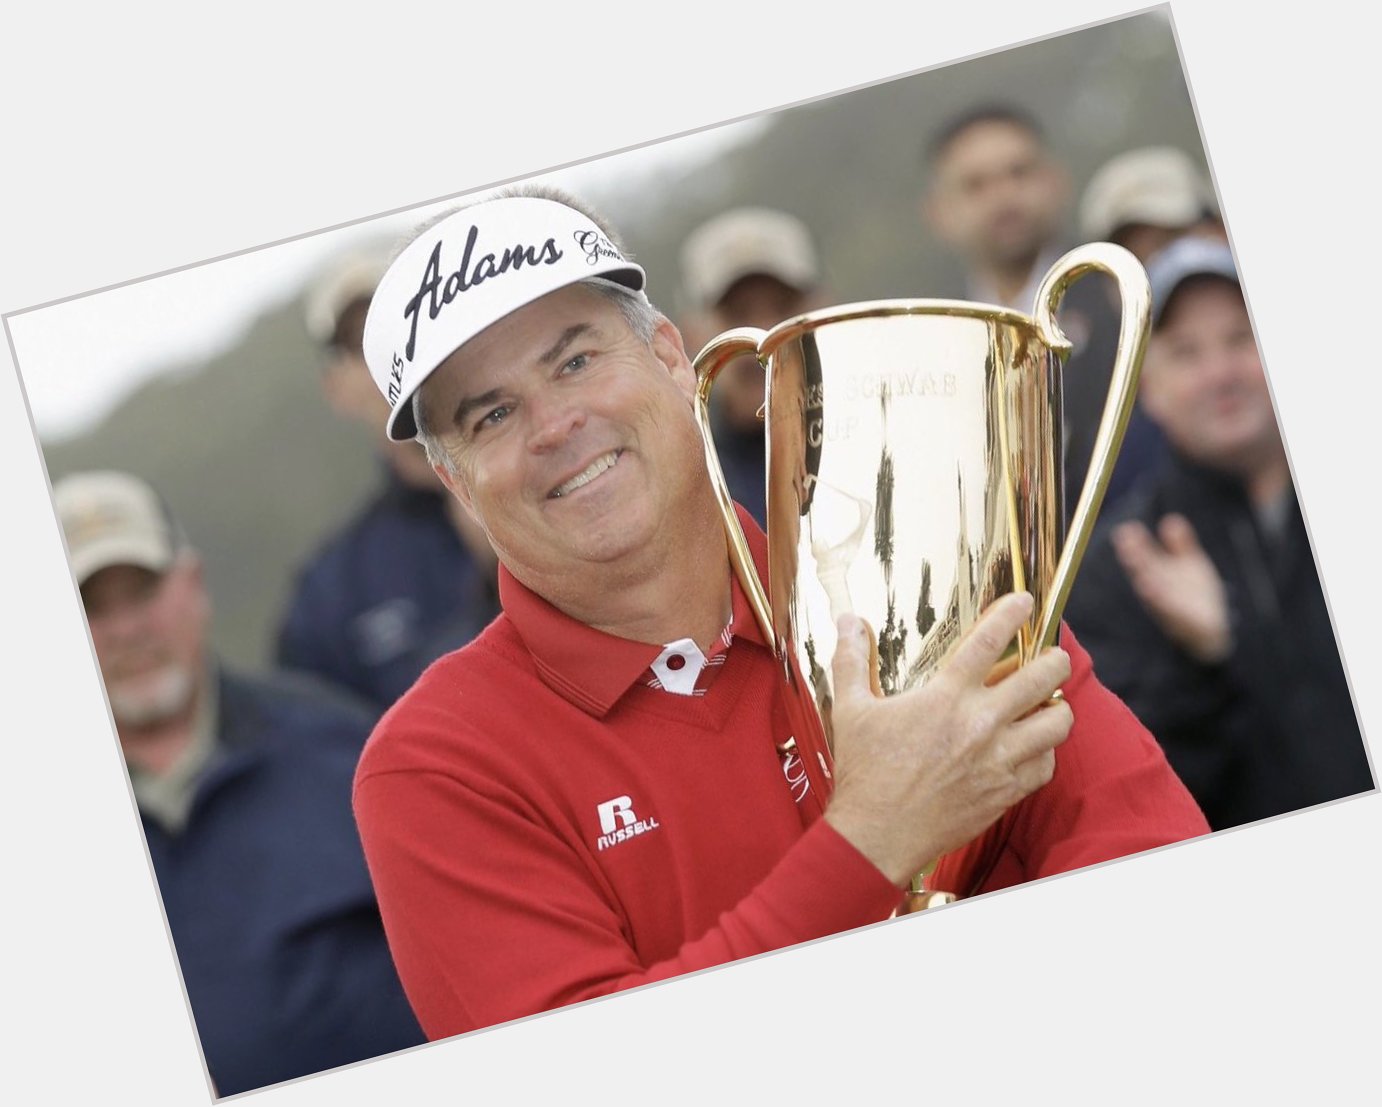 In 2013, Kenny Perry won the season-long race for the Charles Schwab Cup.

Happy Birthday Kenny! 